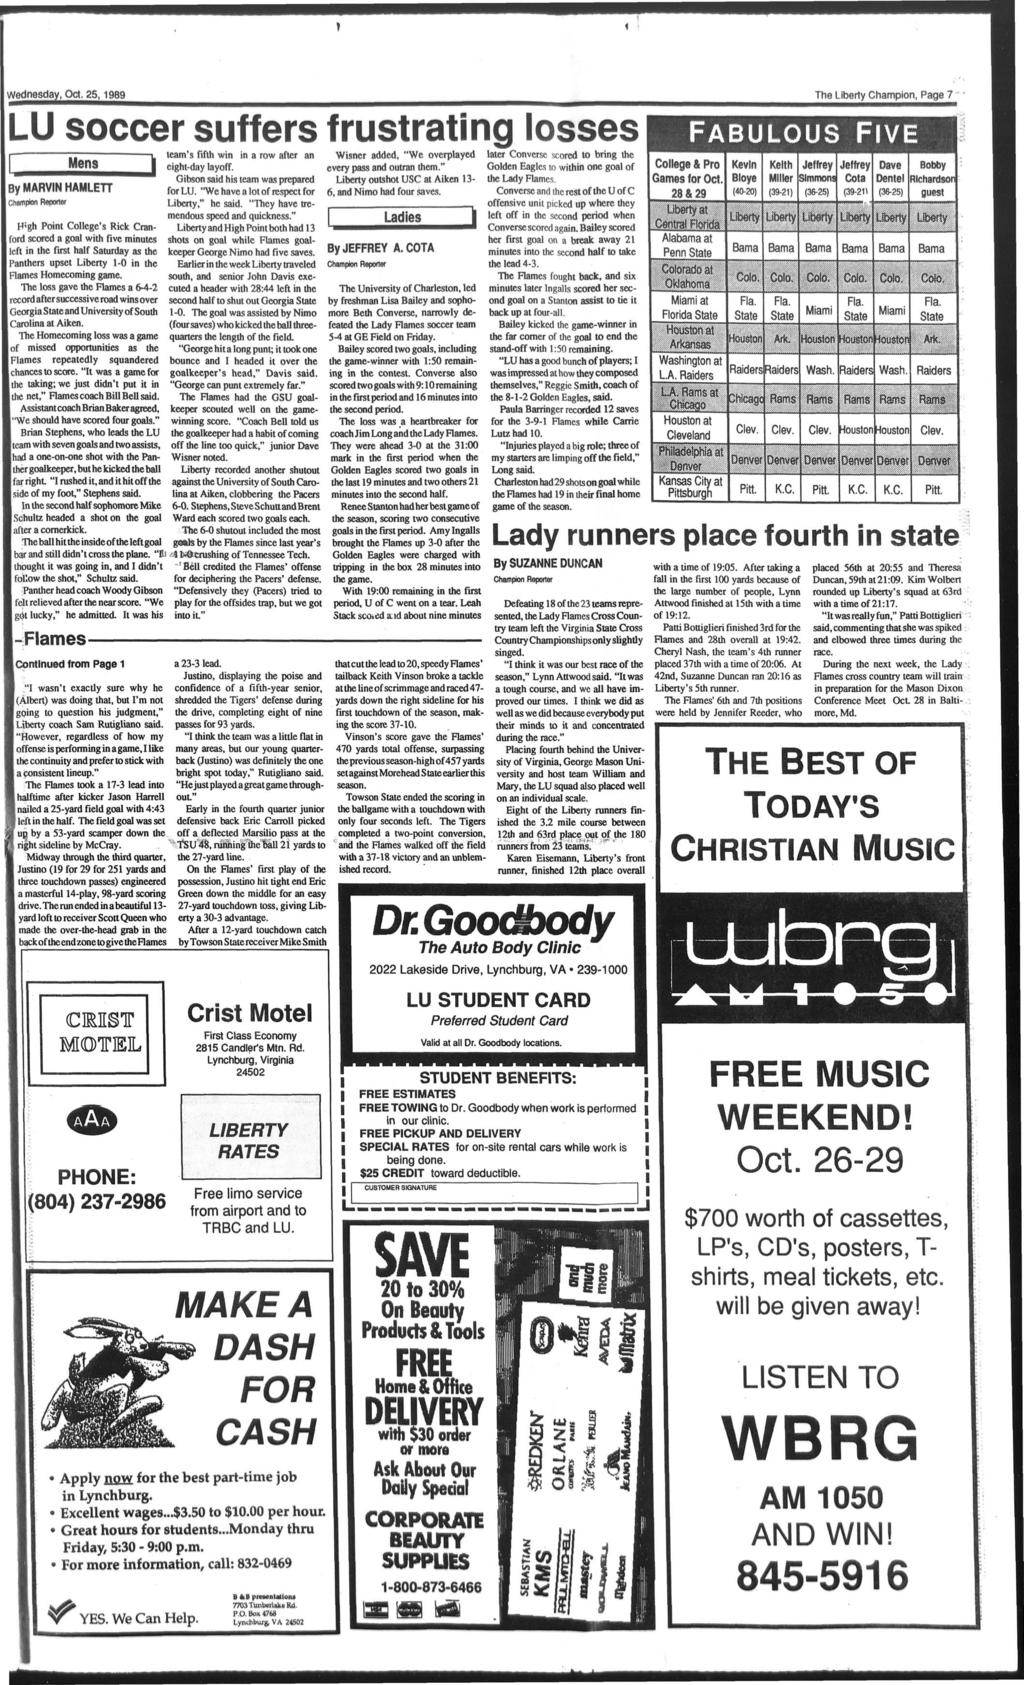 1 Wednesday, Oct. 25,1989 The Lberty Champon, Page 7 LU soccer suffers frustratng losses Wsner added, "We overplayed every pass and outran them.